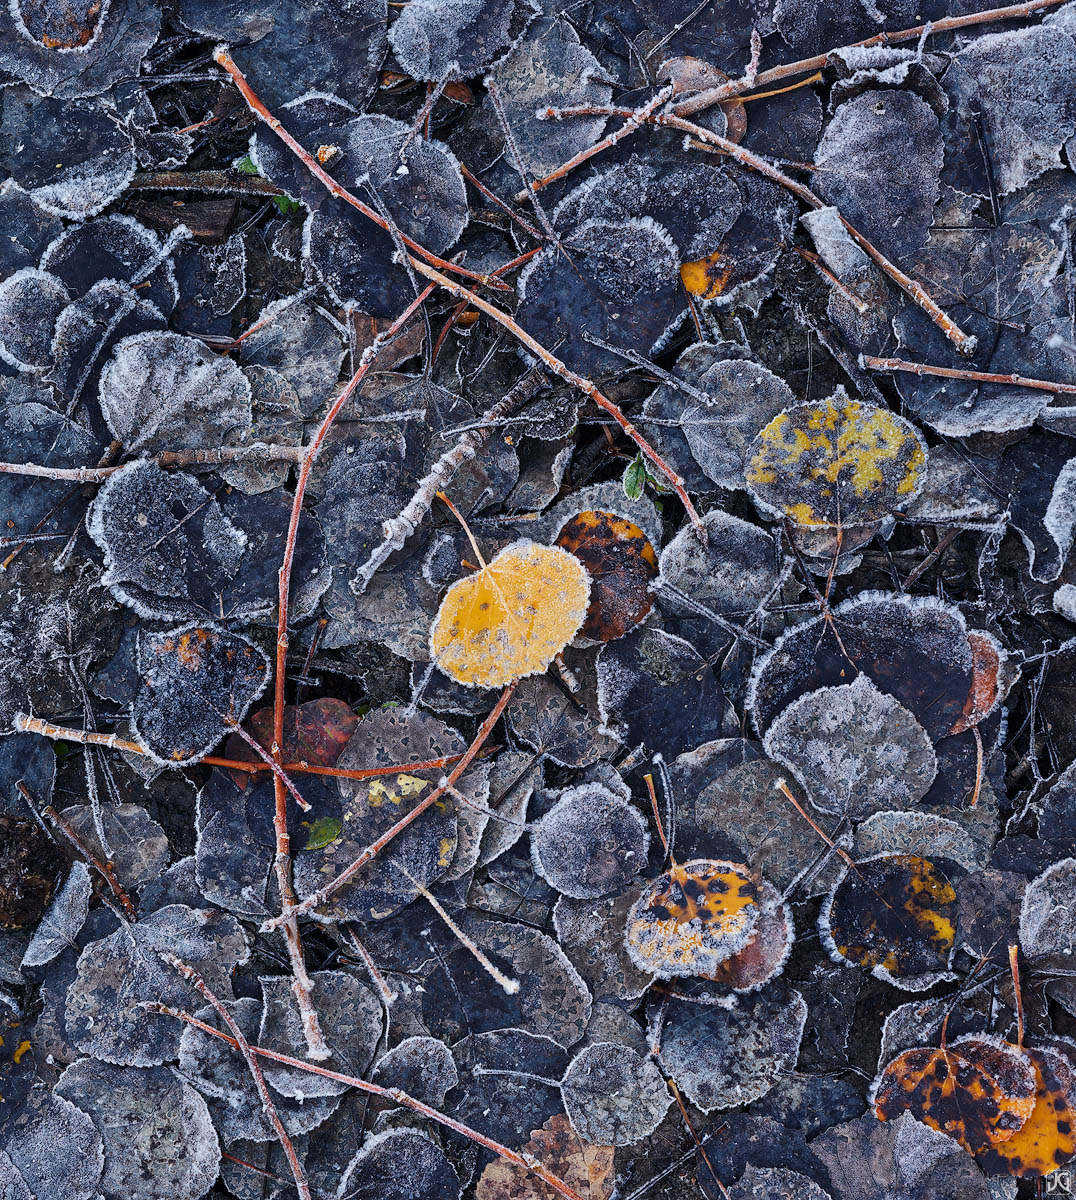 Small twigs and early morning frost lie on a carpet of autumn aspen leaves in their various states of decomposition.